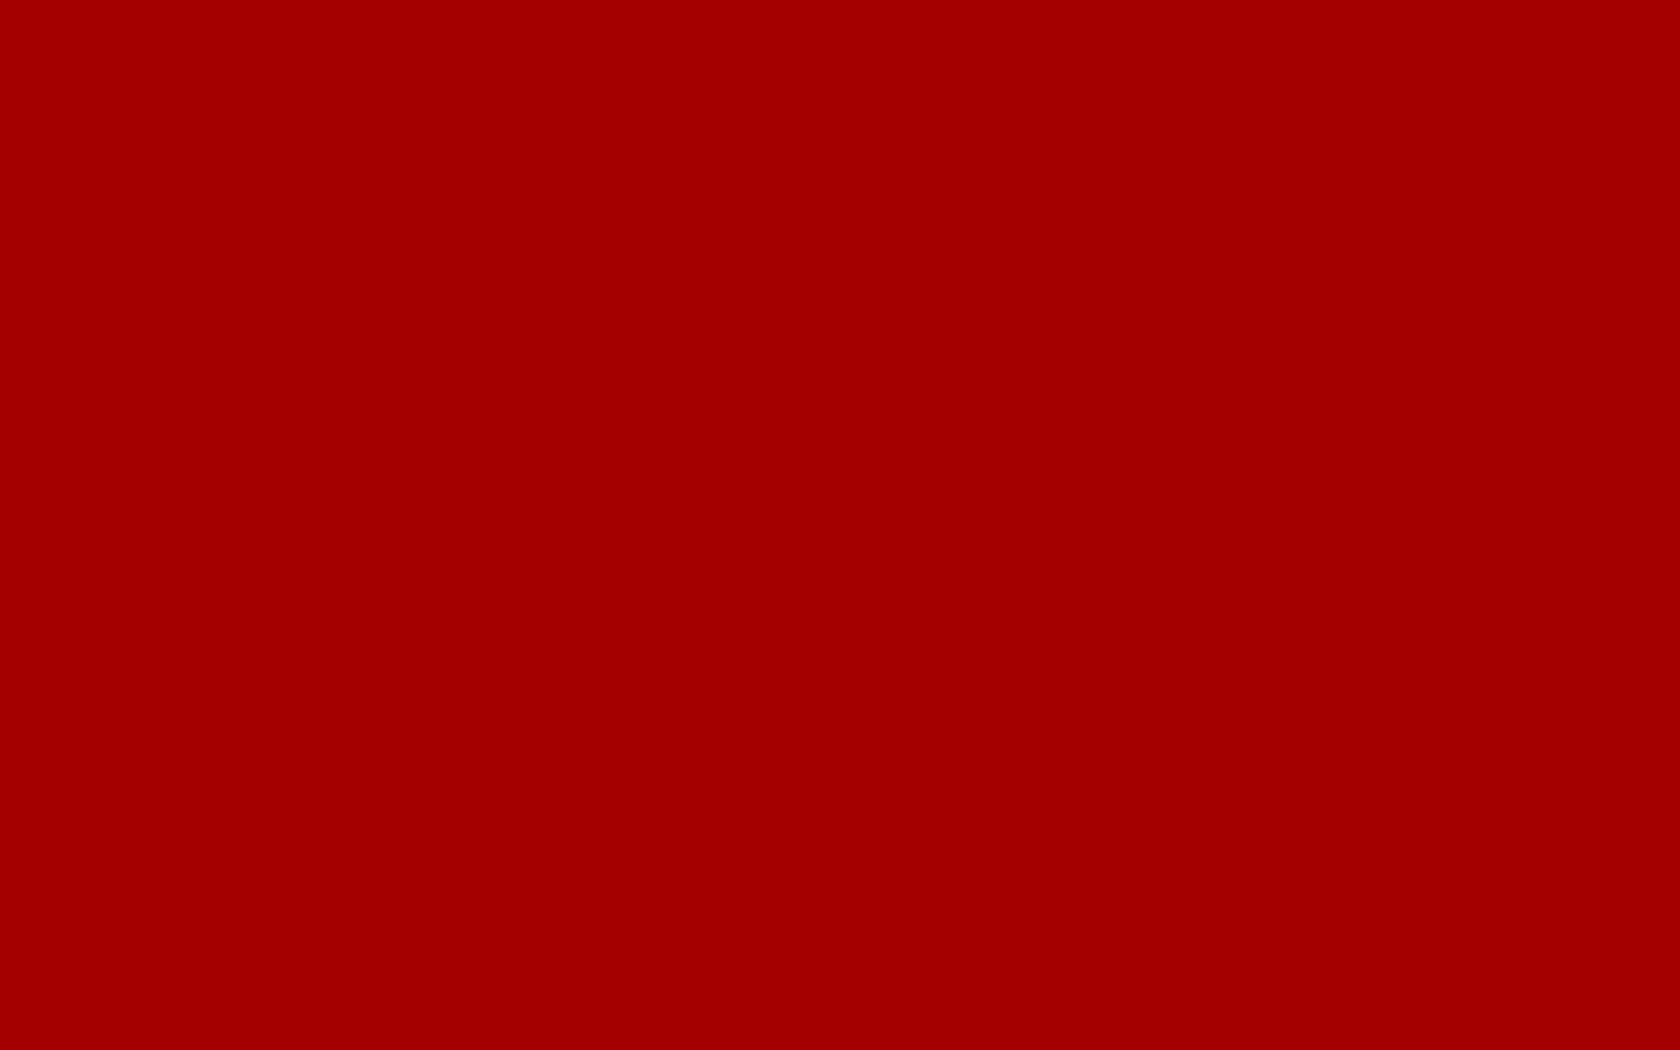 Resolution Dark Candy Apple Red Solid Color Background